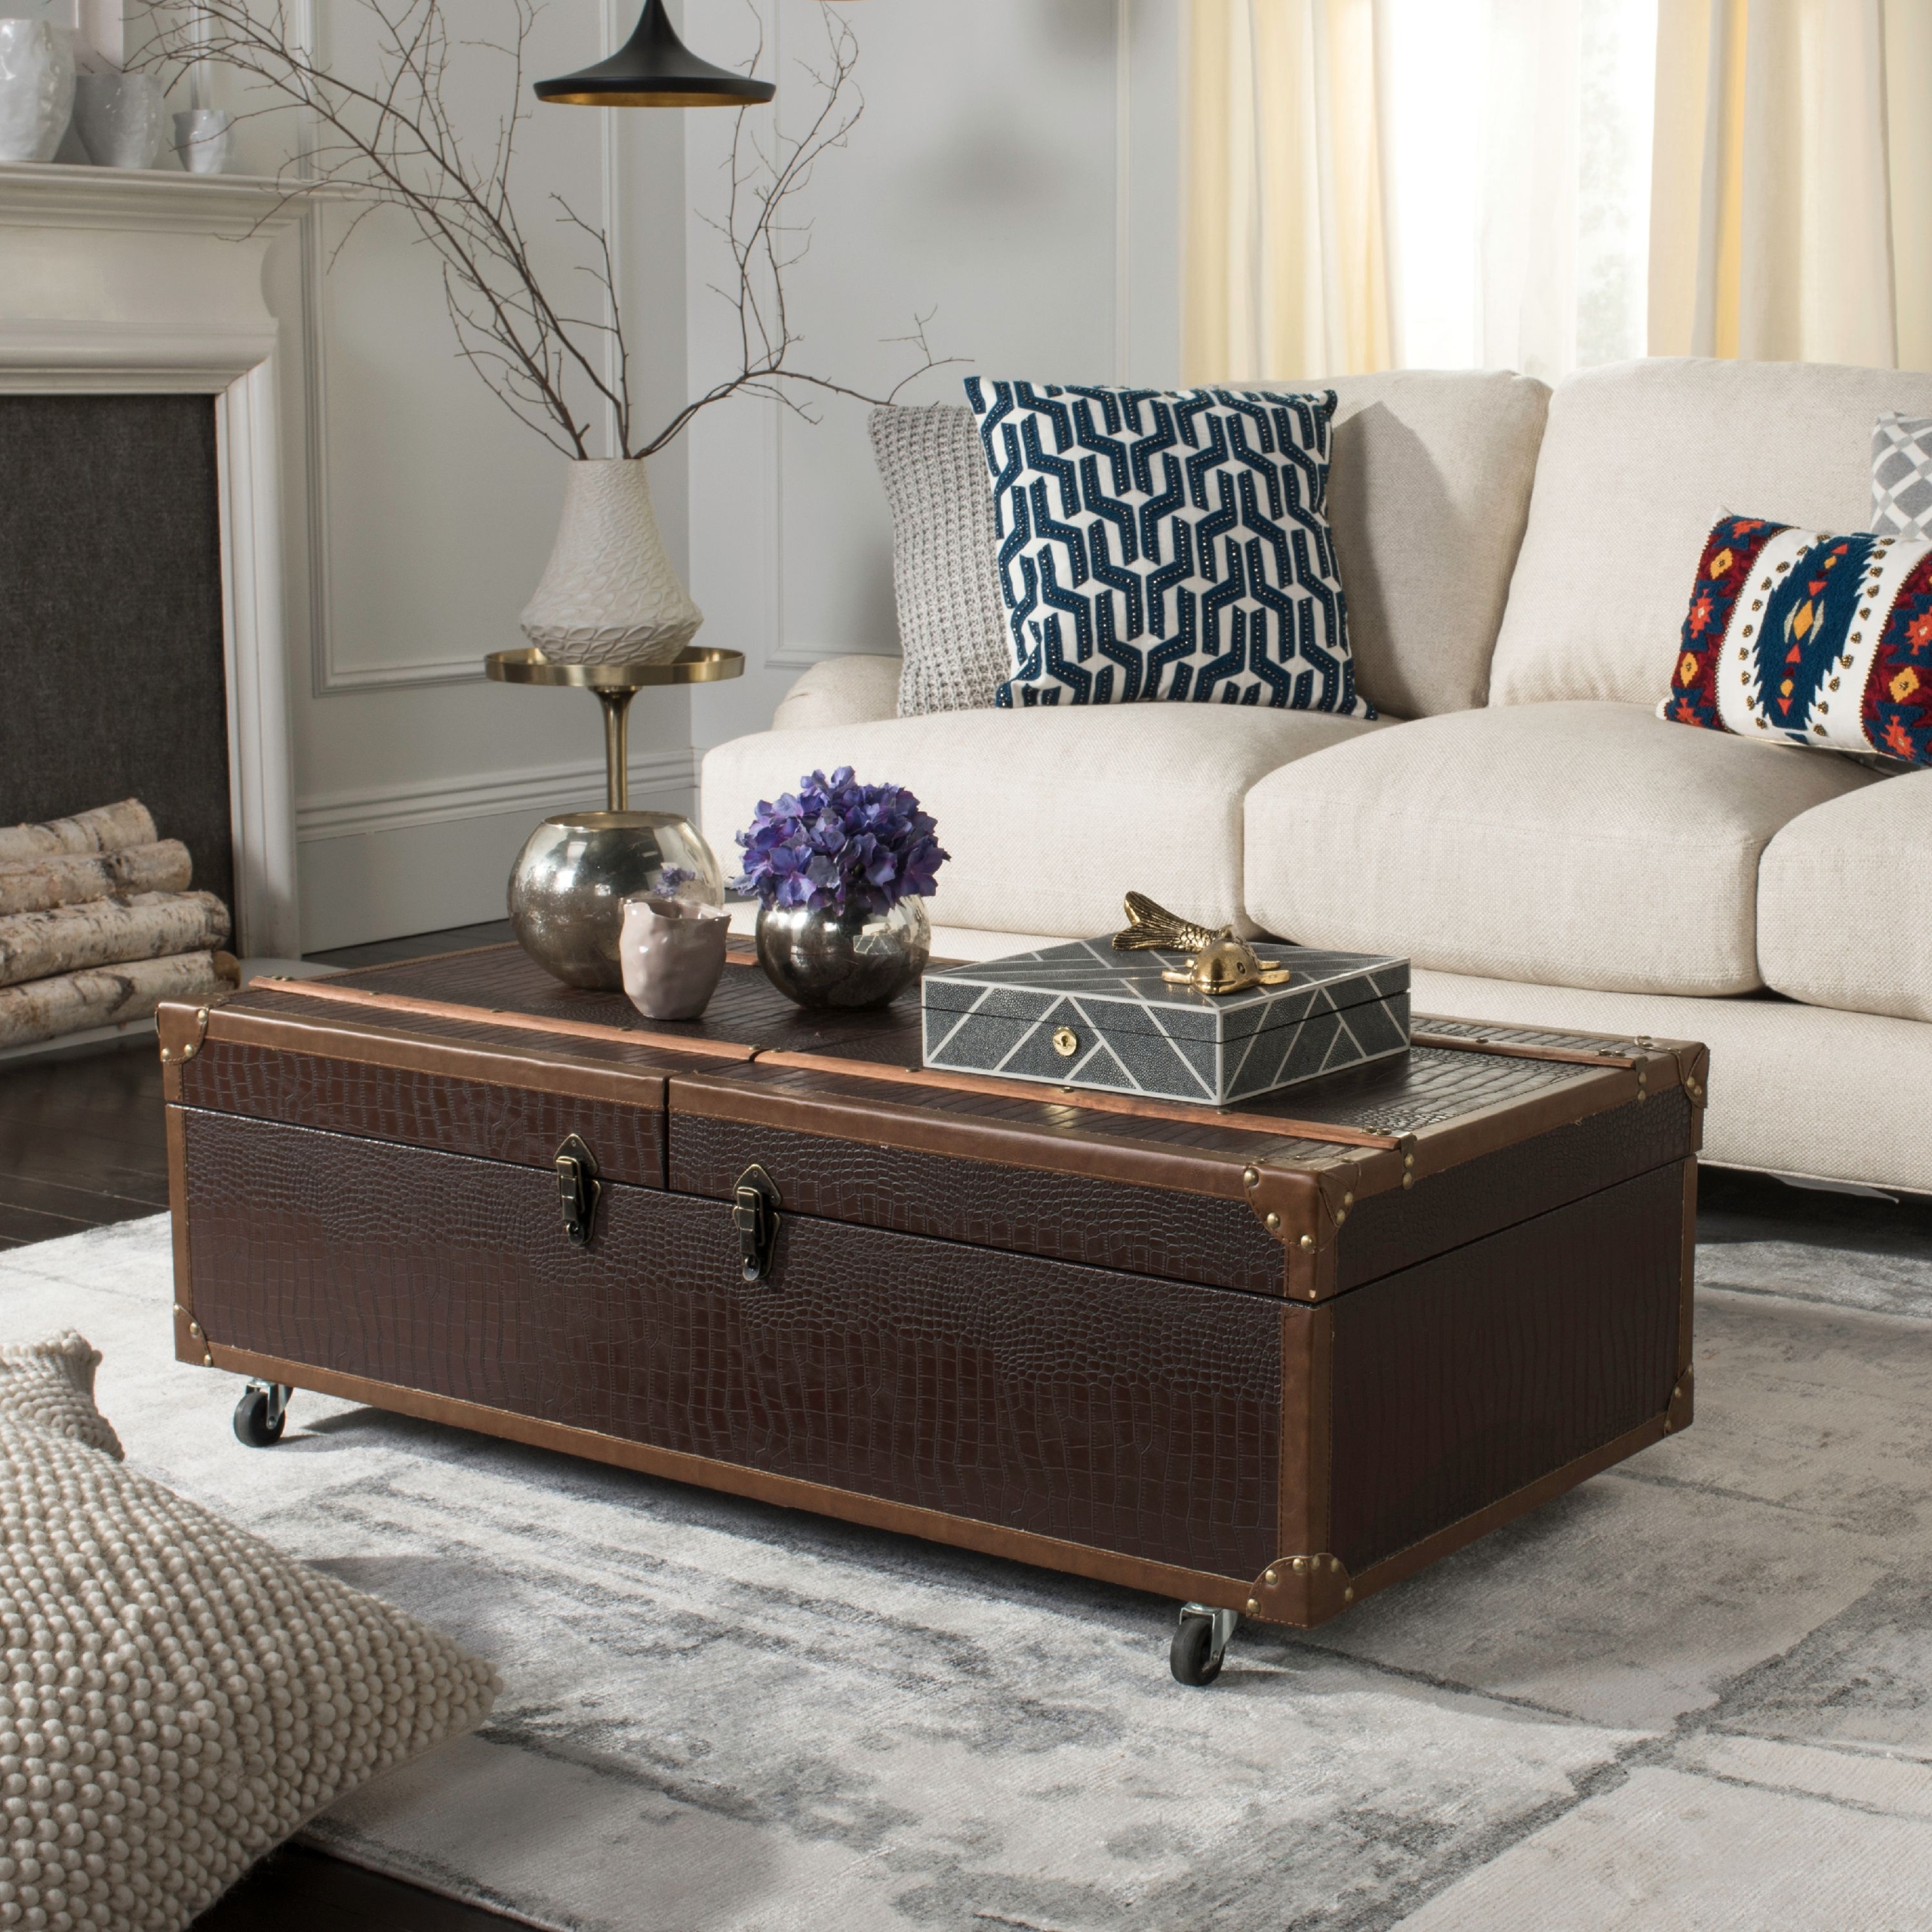 Coffee Table With Wheels Visualhunt, Storage Trunk Coffee Table On Wheels